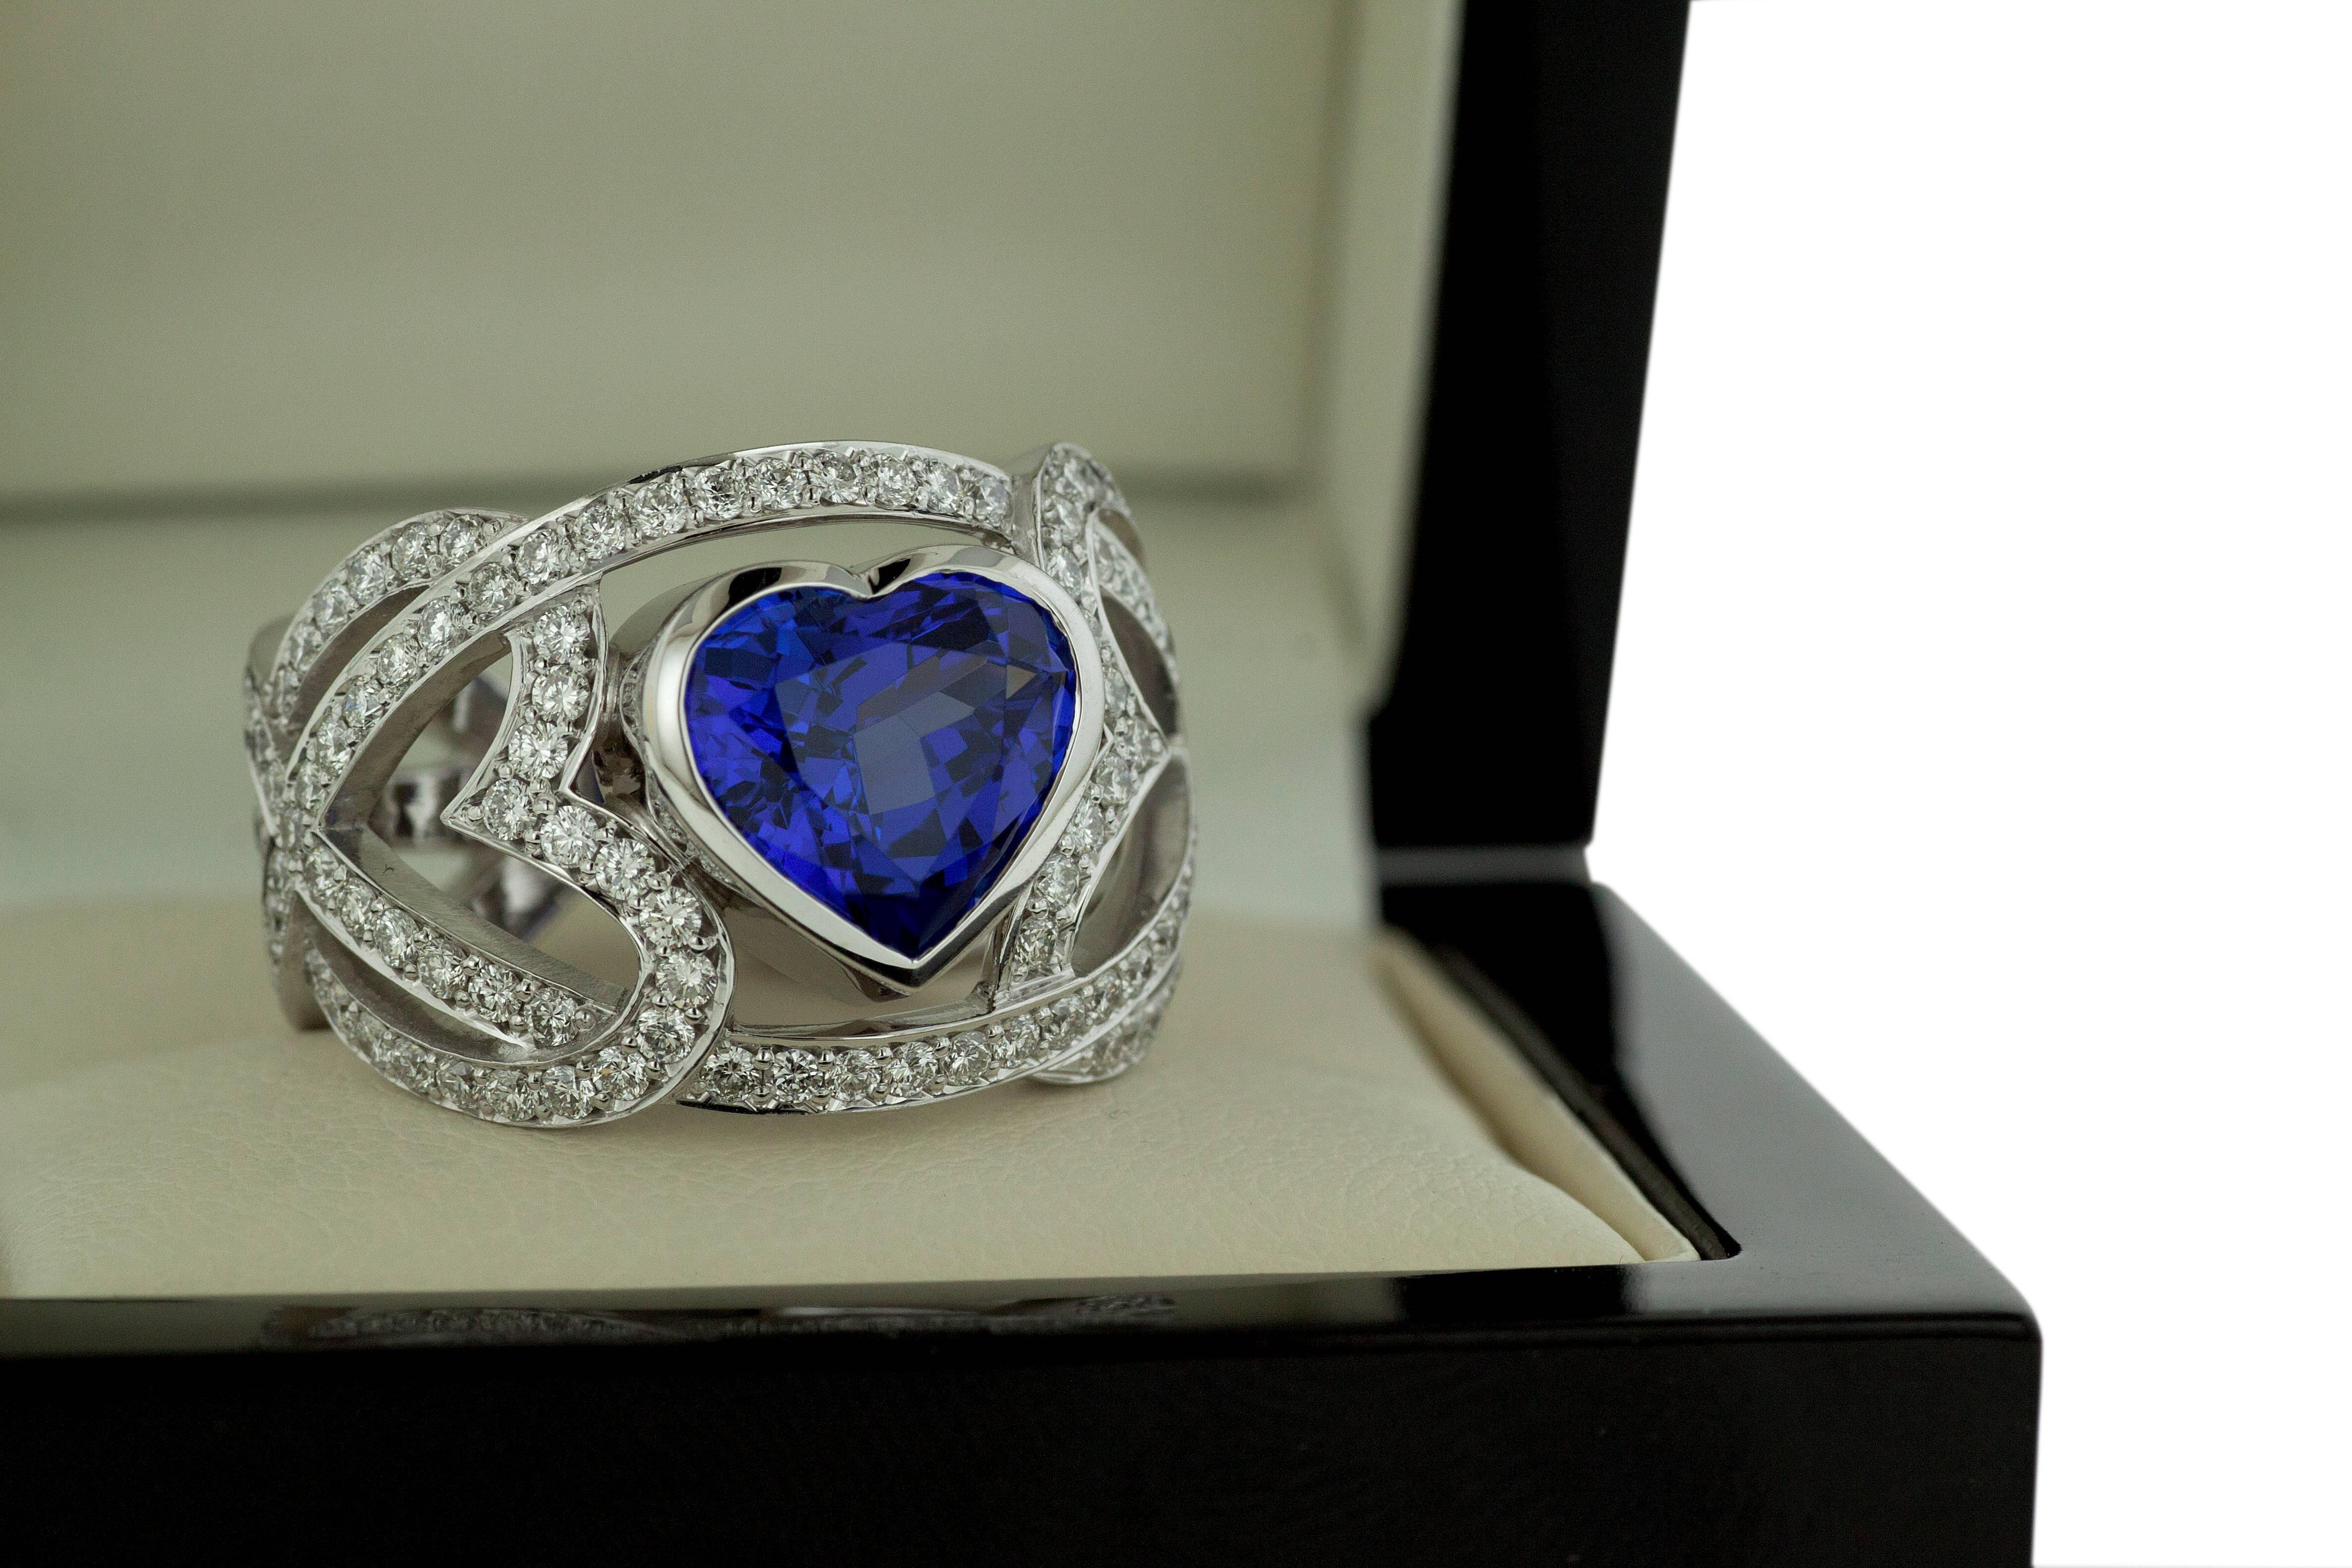 Brand new, one-of-a-kind, dark blue Tanzanite & Diamond fashion ring. The white gold mounting and setting are especially designed to fully protect the heart-cut gemstone, without losing its reflected light sparkle. The tanzanite is surrounded by